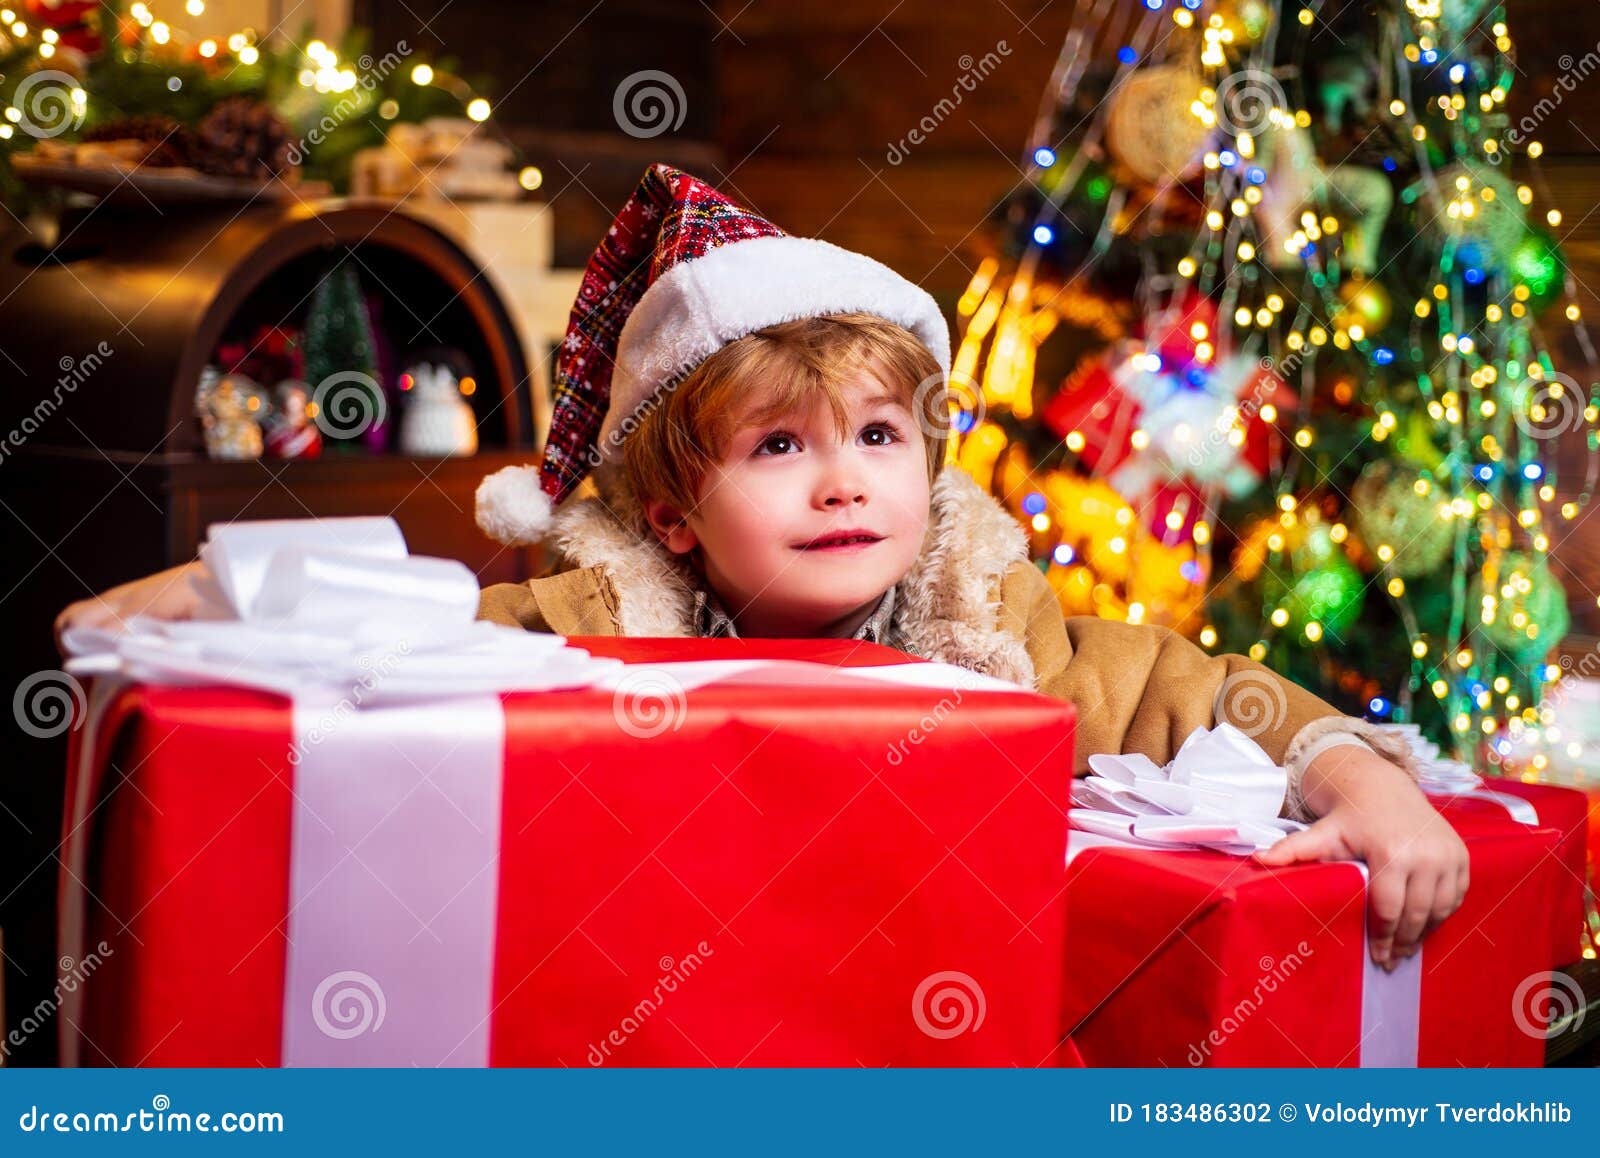 Happy Holidays!, cute & little